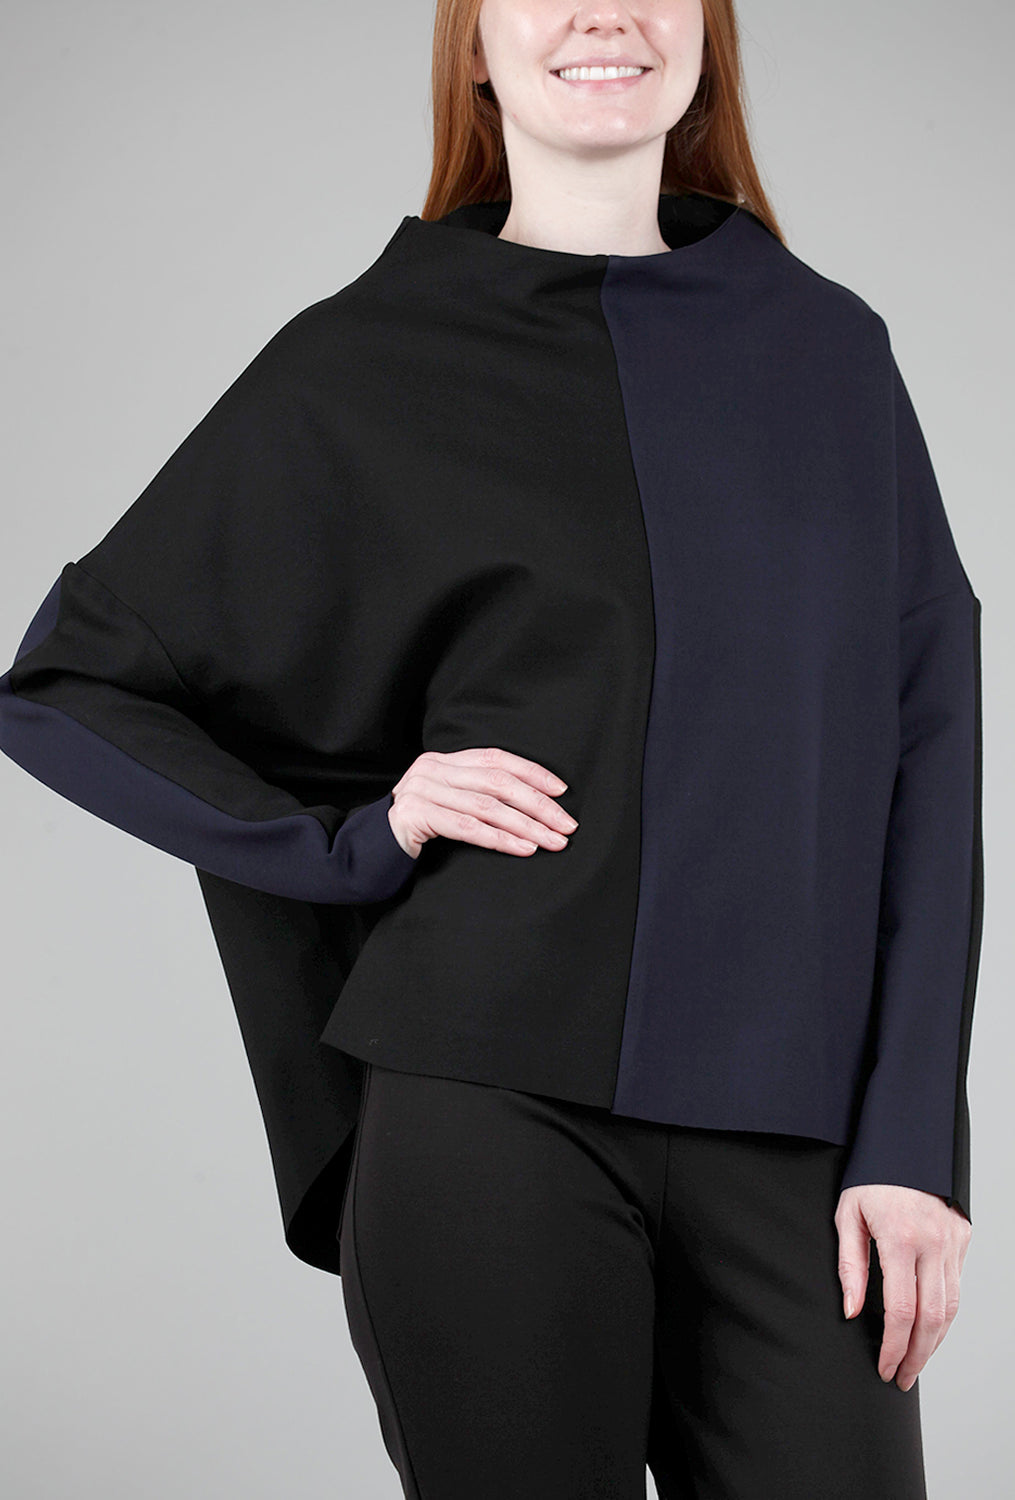 Planet Two-Tone Top, Black/Midnight 